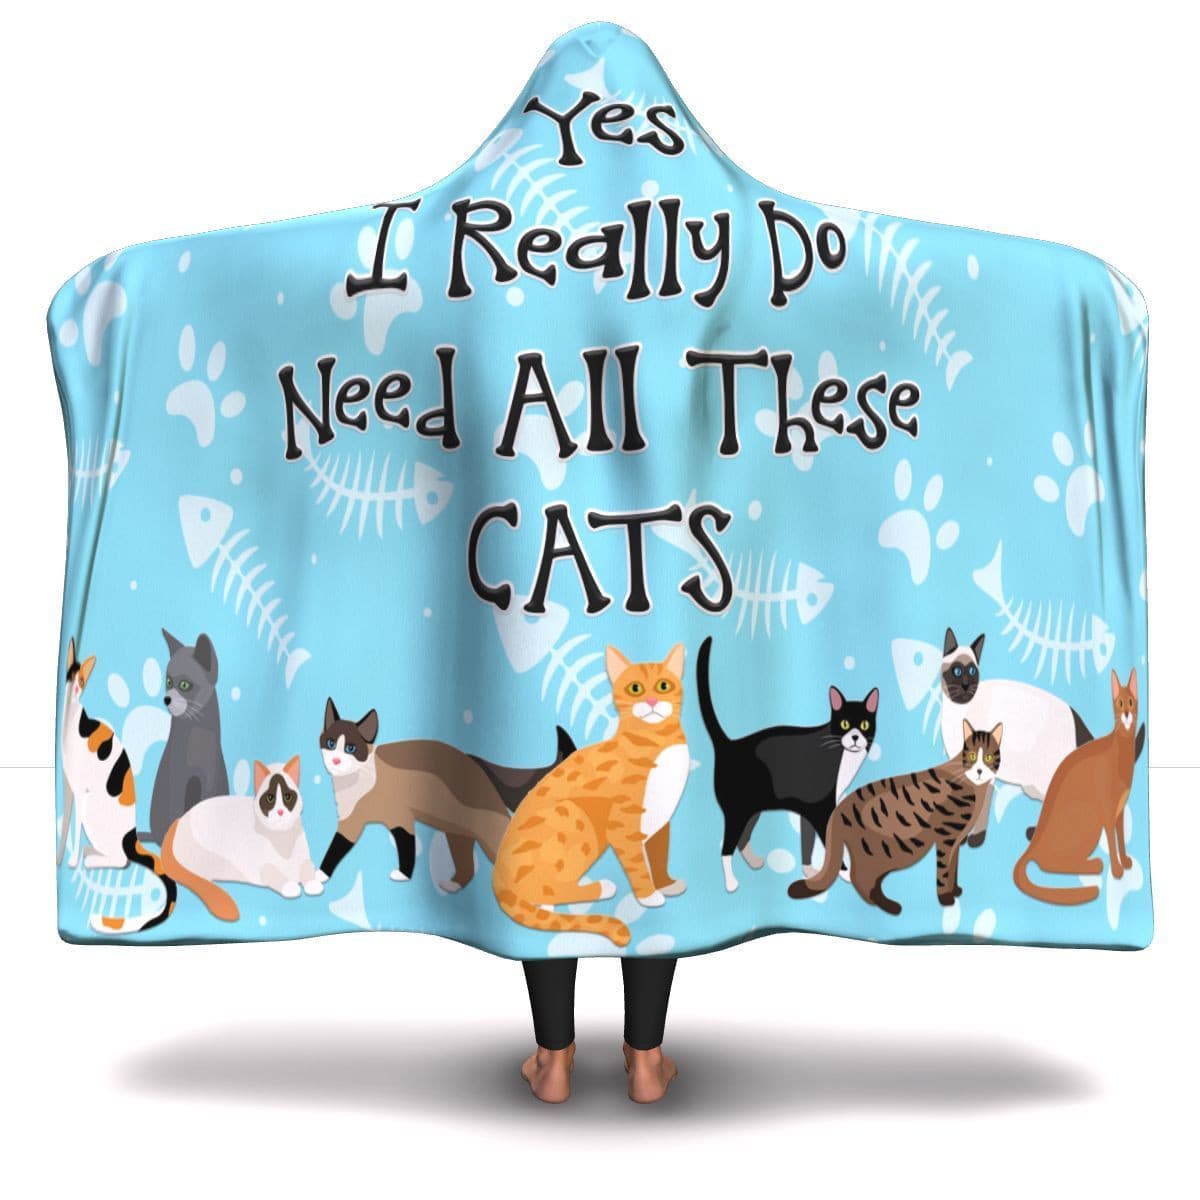 Yes I Need All These Cats - Hooded Blanket.